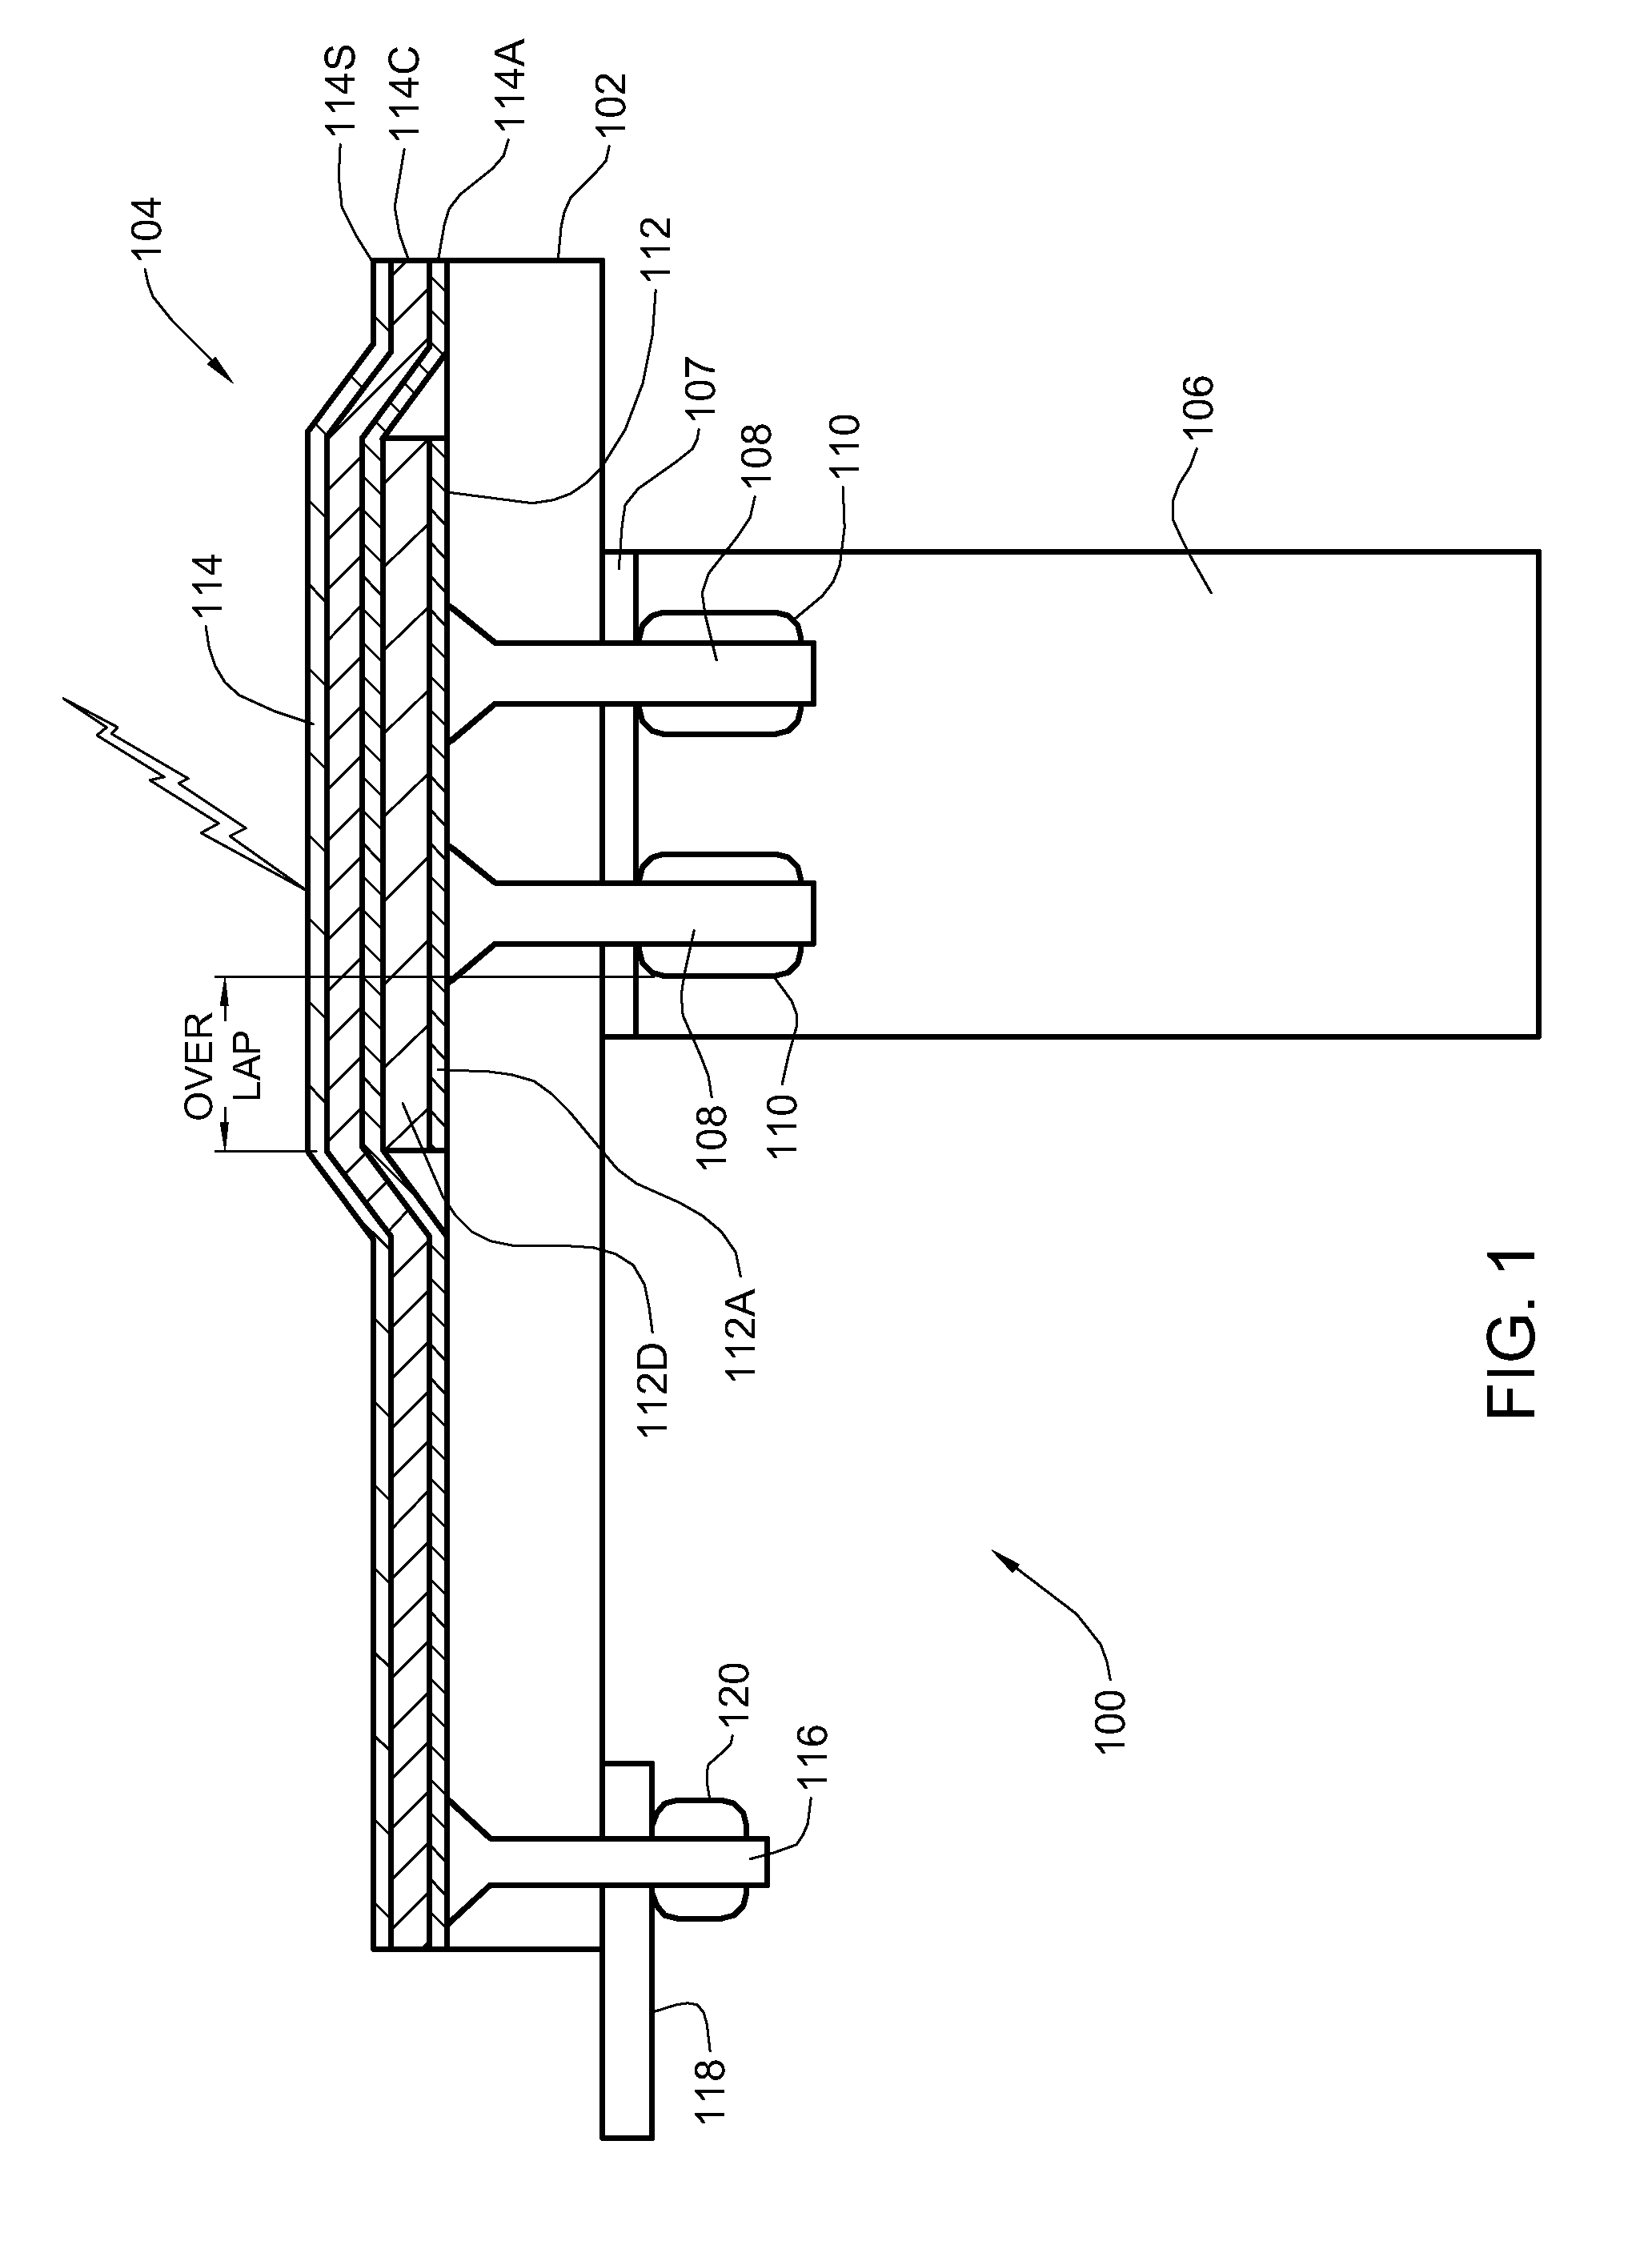 Lightning protection system for composite structure